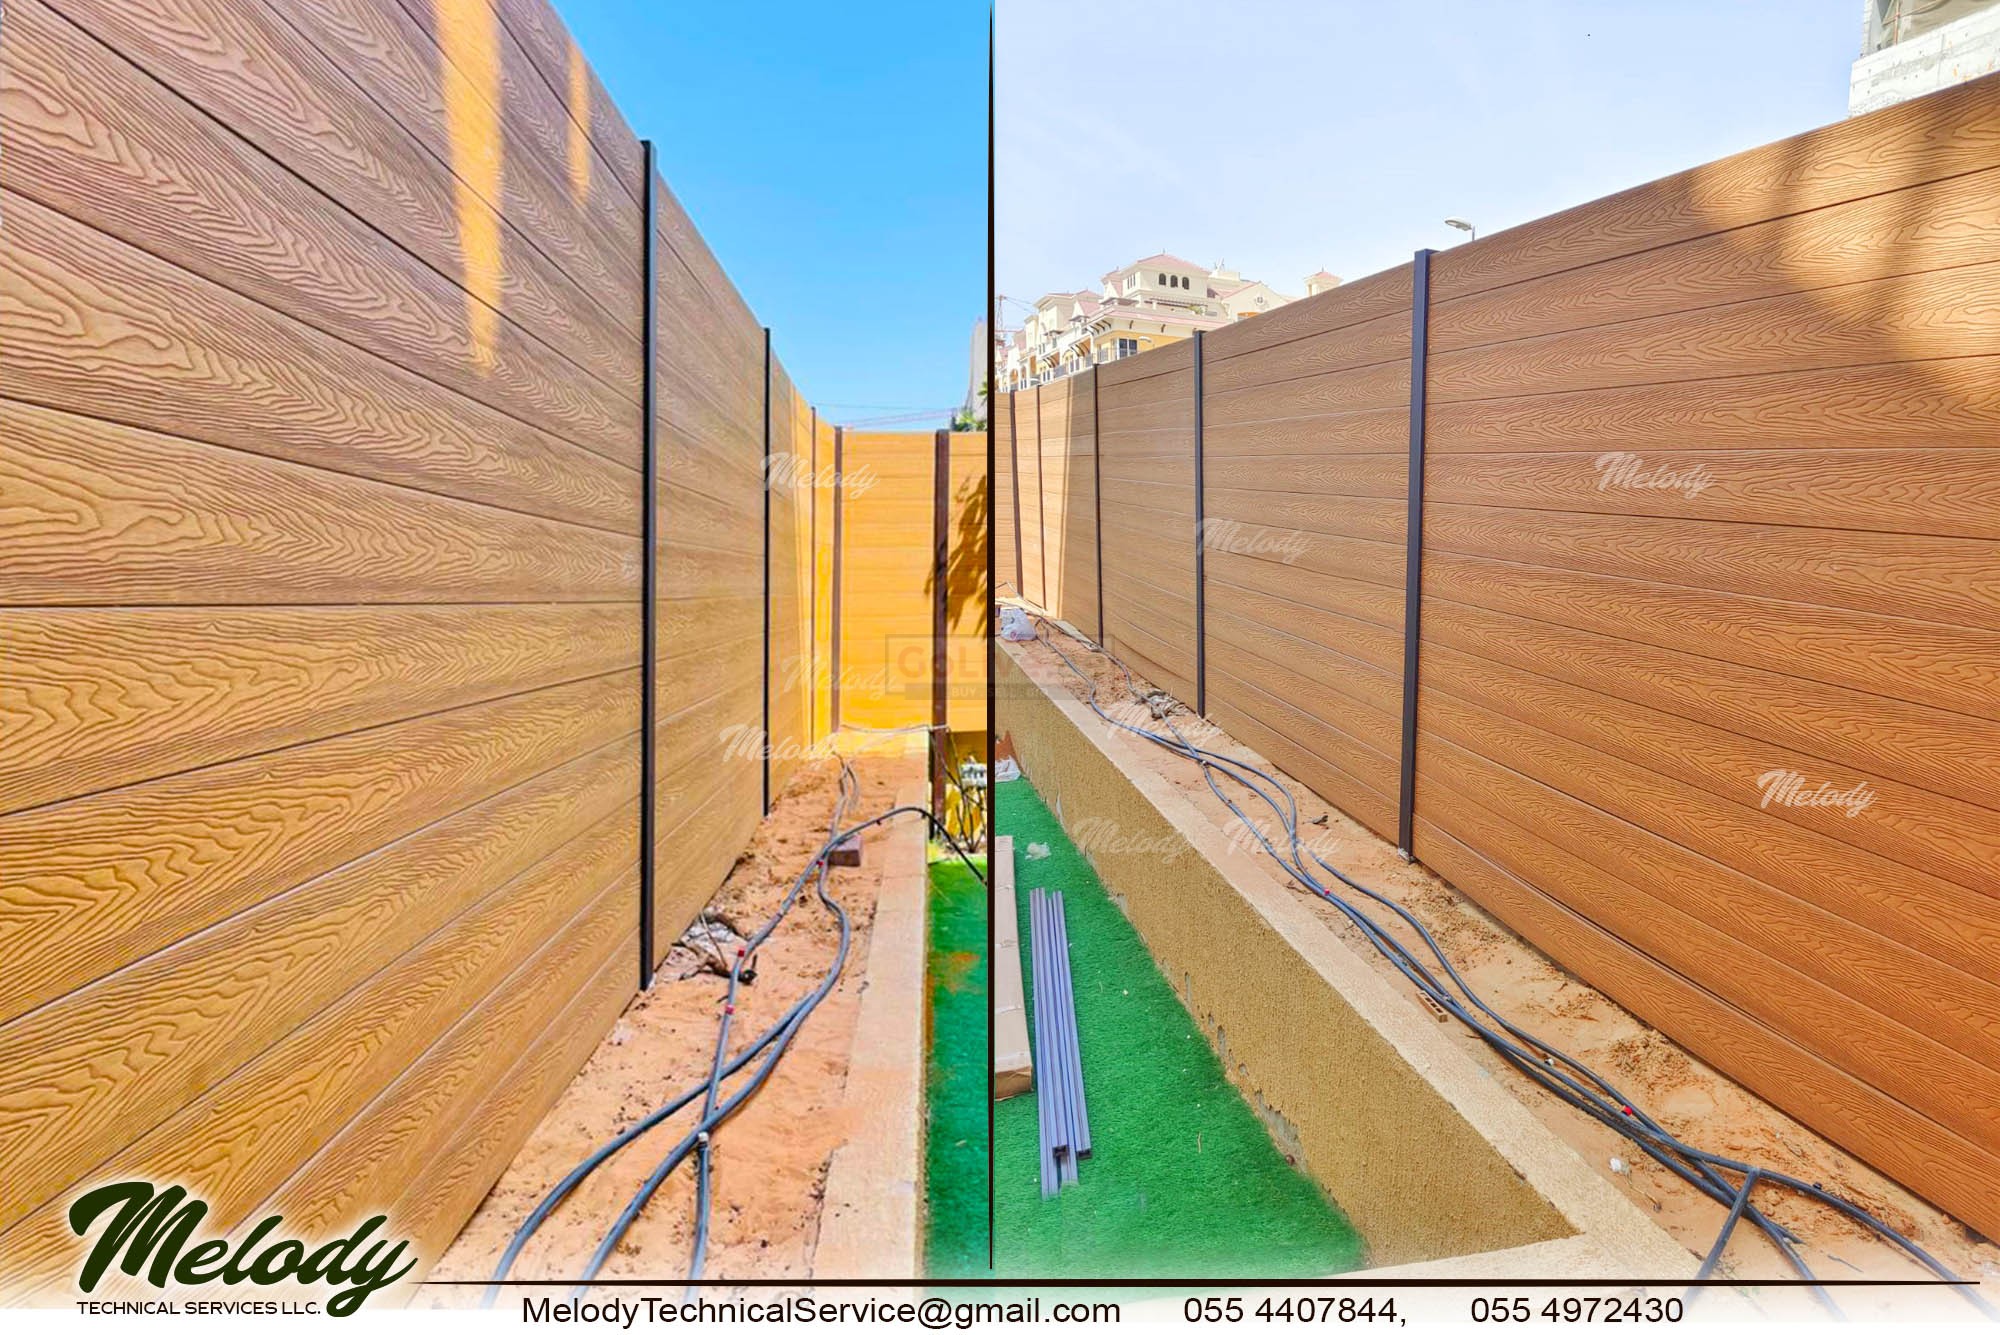 Garden Fencing in Dubai | WPC Fence | Wooden Fence | Fence Suppliers UAE